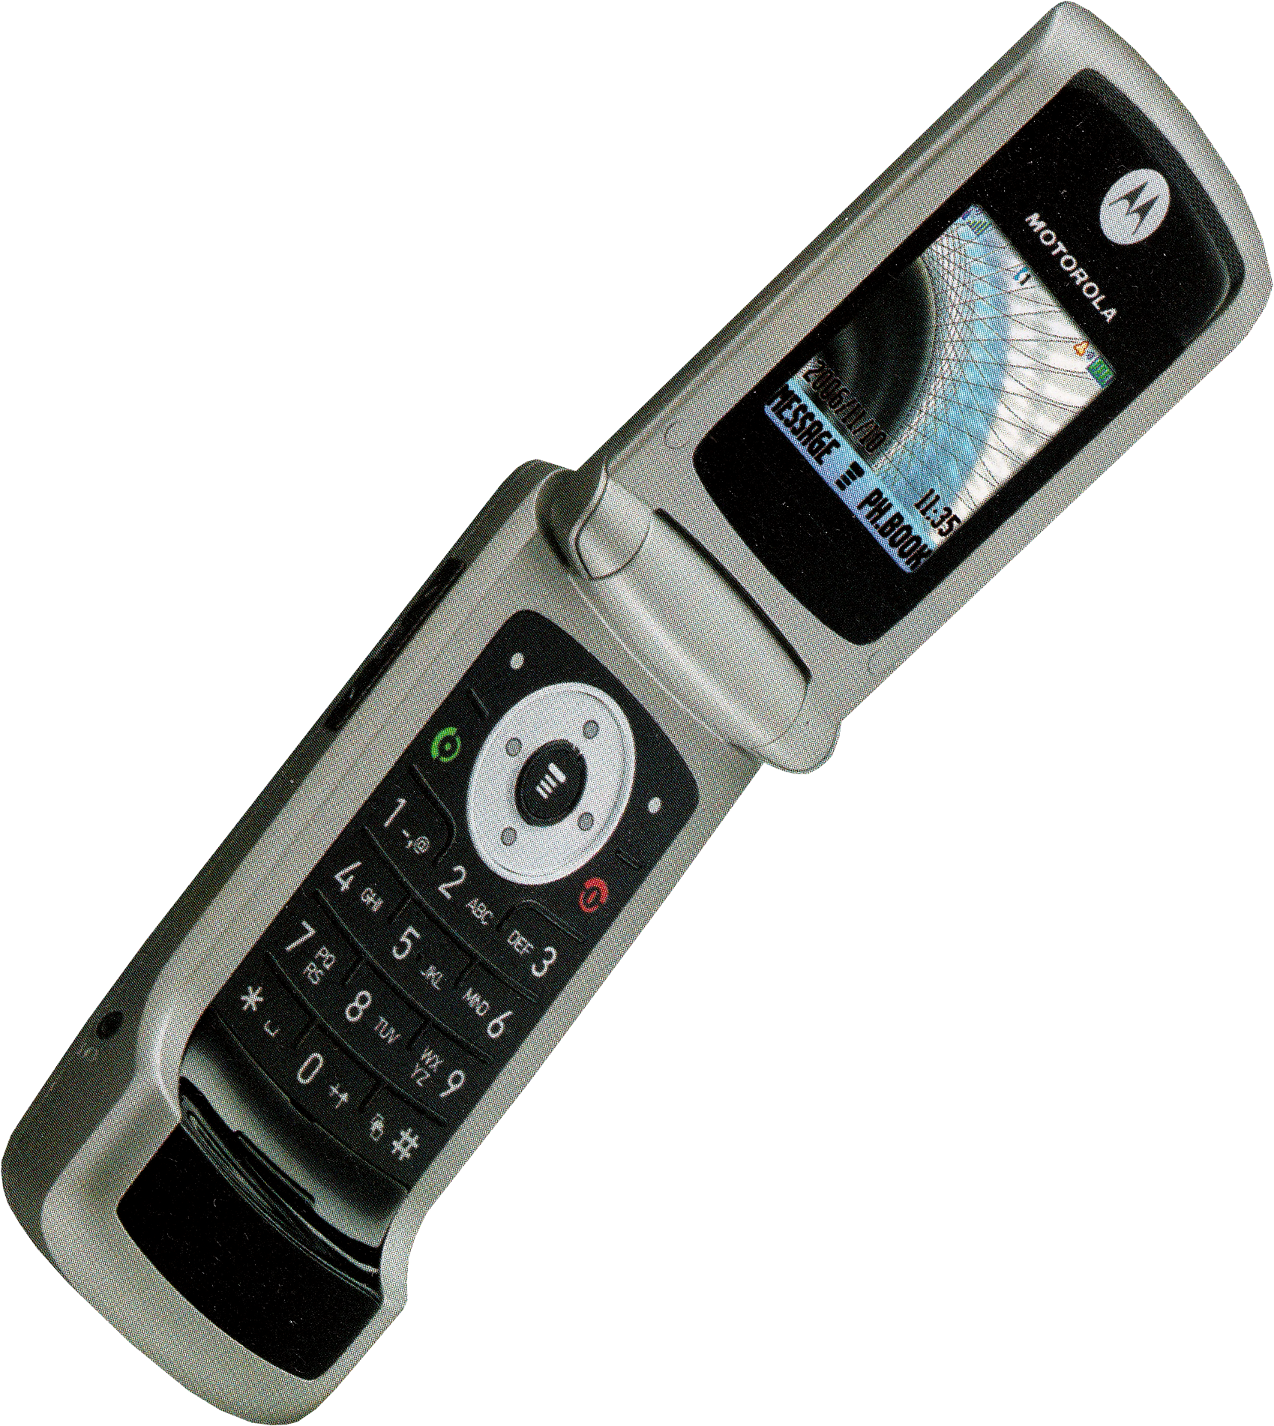 old-mobile-phones-2.png